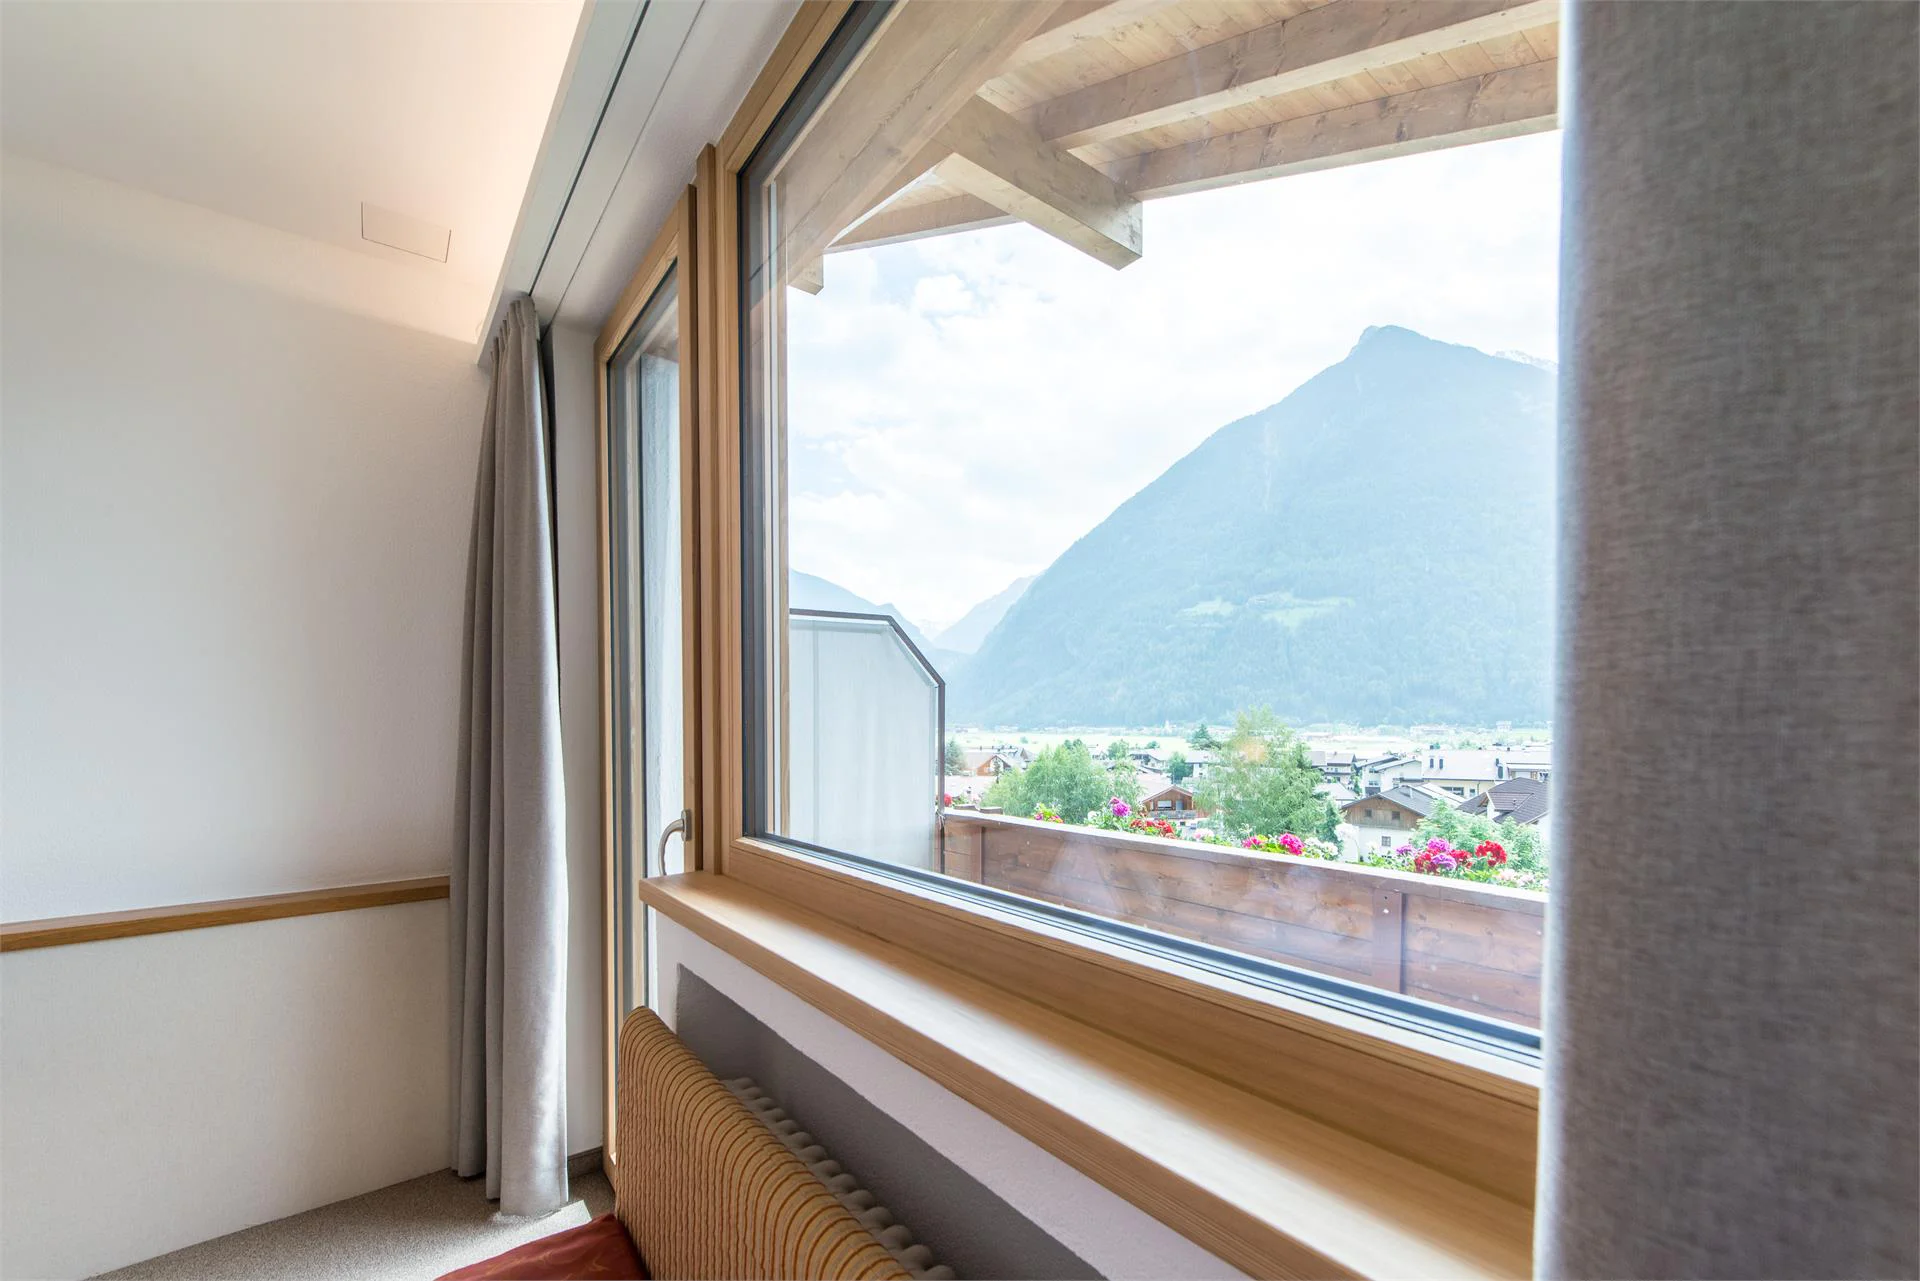 Hotel Taufers Campo Tures 19 suedtirol.info